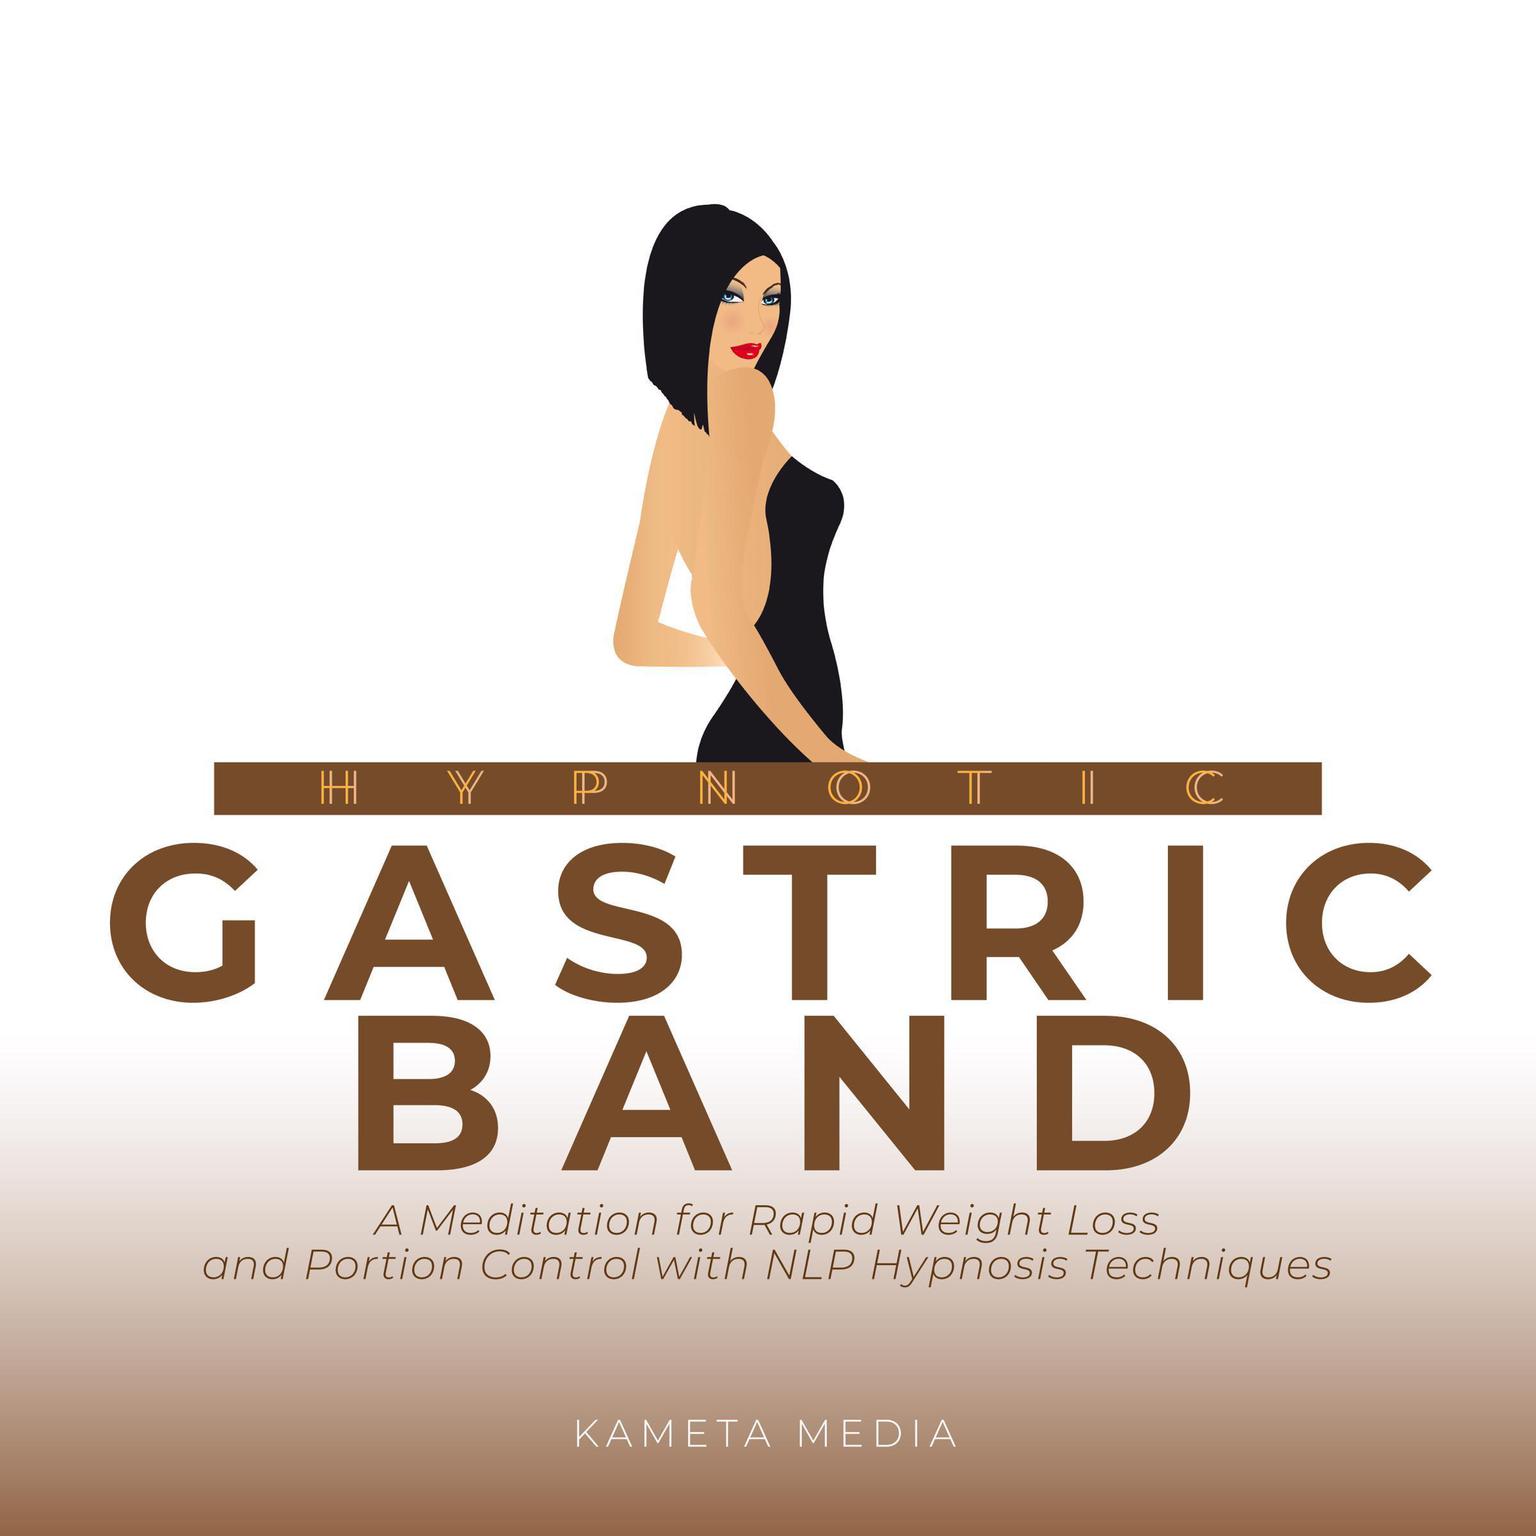 Hypnotic Gastric Band: A Meditation for Rapid Weight Loss and Portion Control with NLP Hypnosis Techniques Audiobook, by Kameta Media